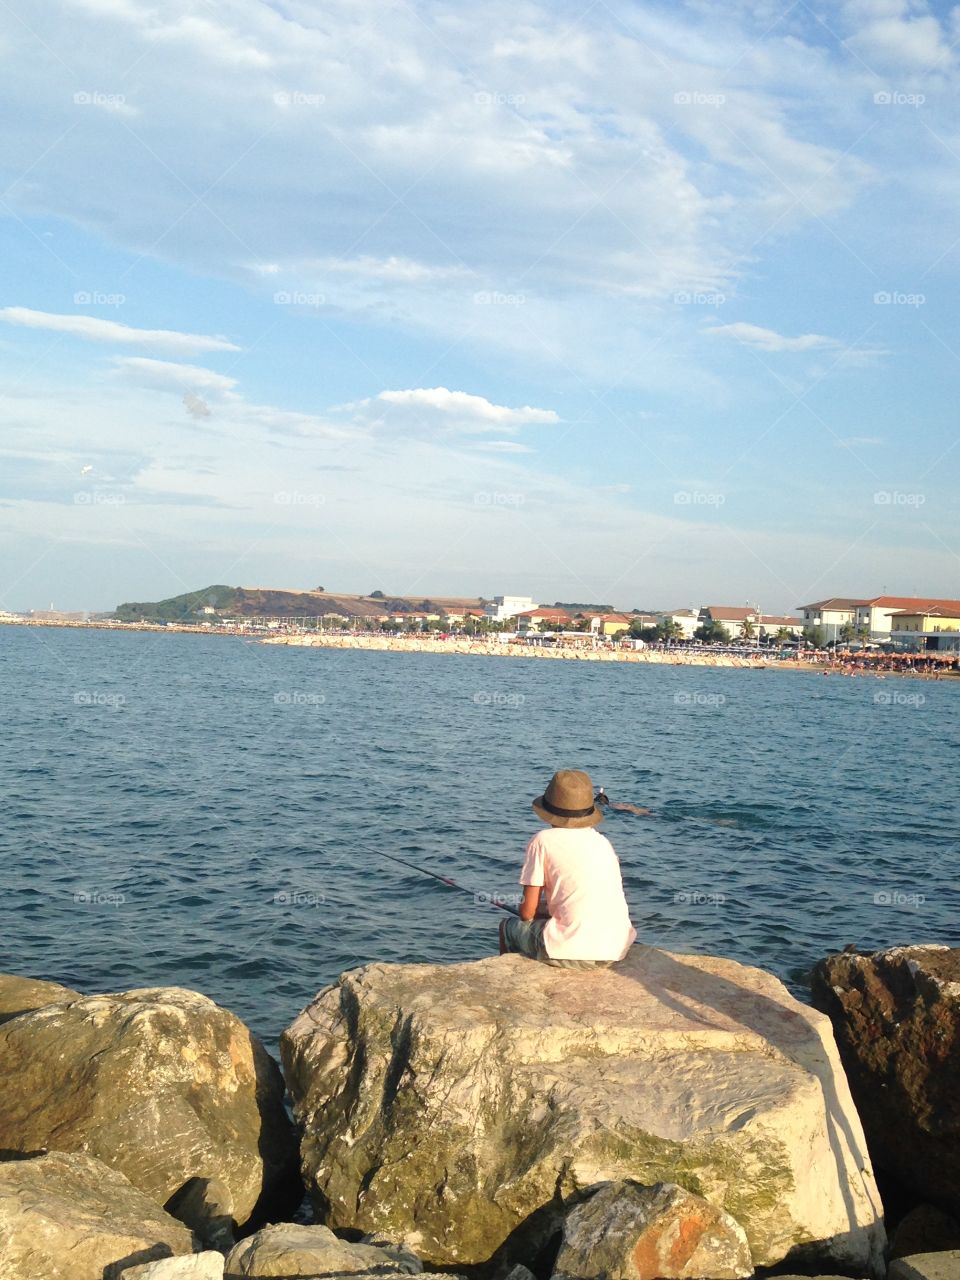 Sitting by the sea. The boy was sitting and fishing by the sea